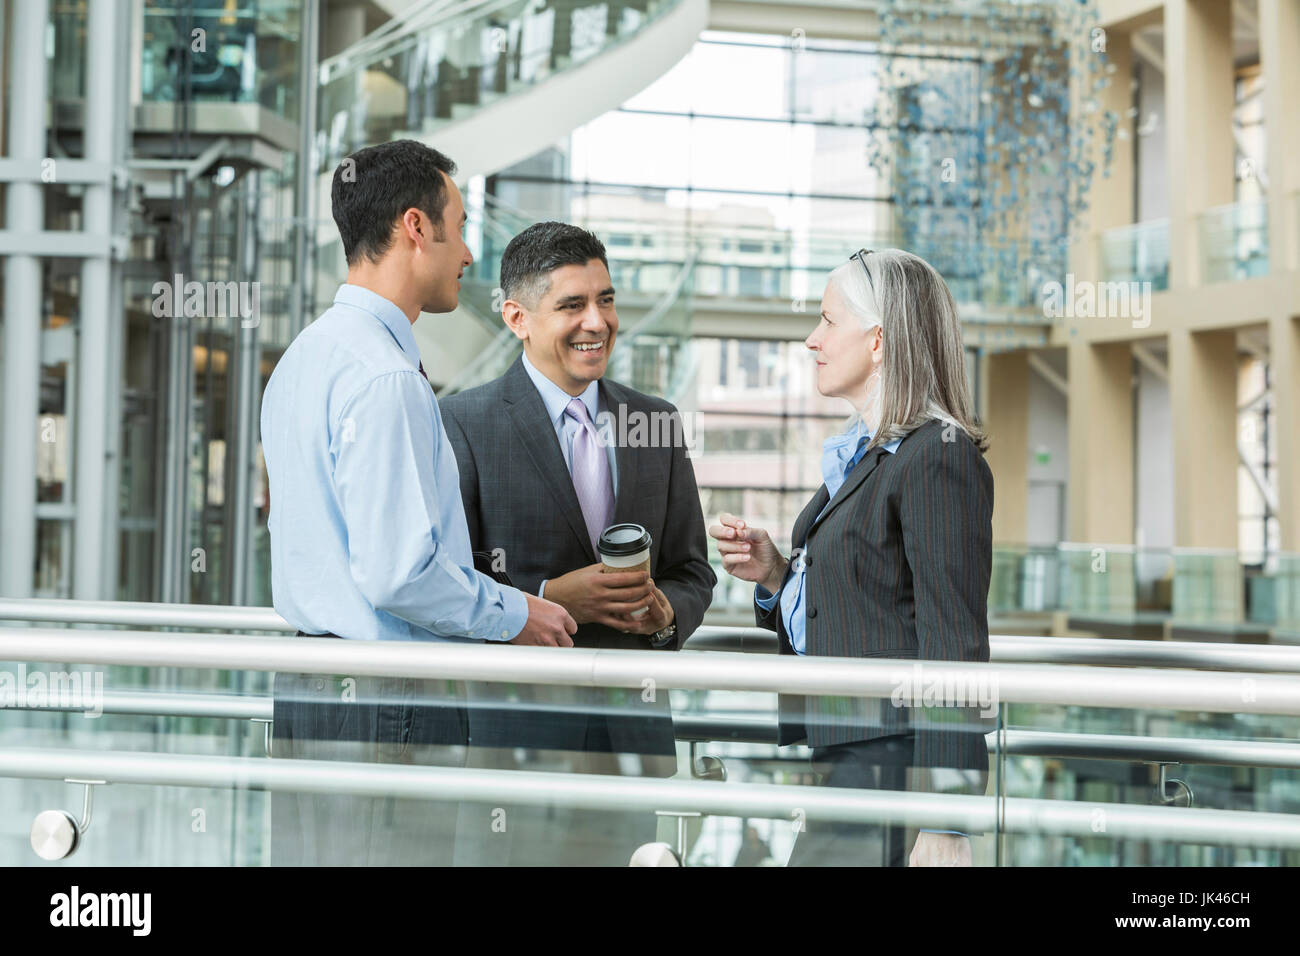 Business people talking in lobby Stock Photo